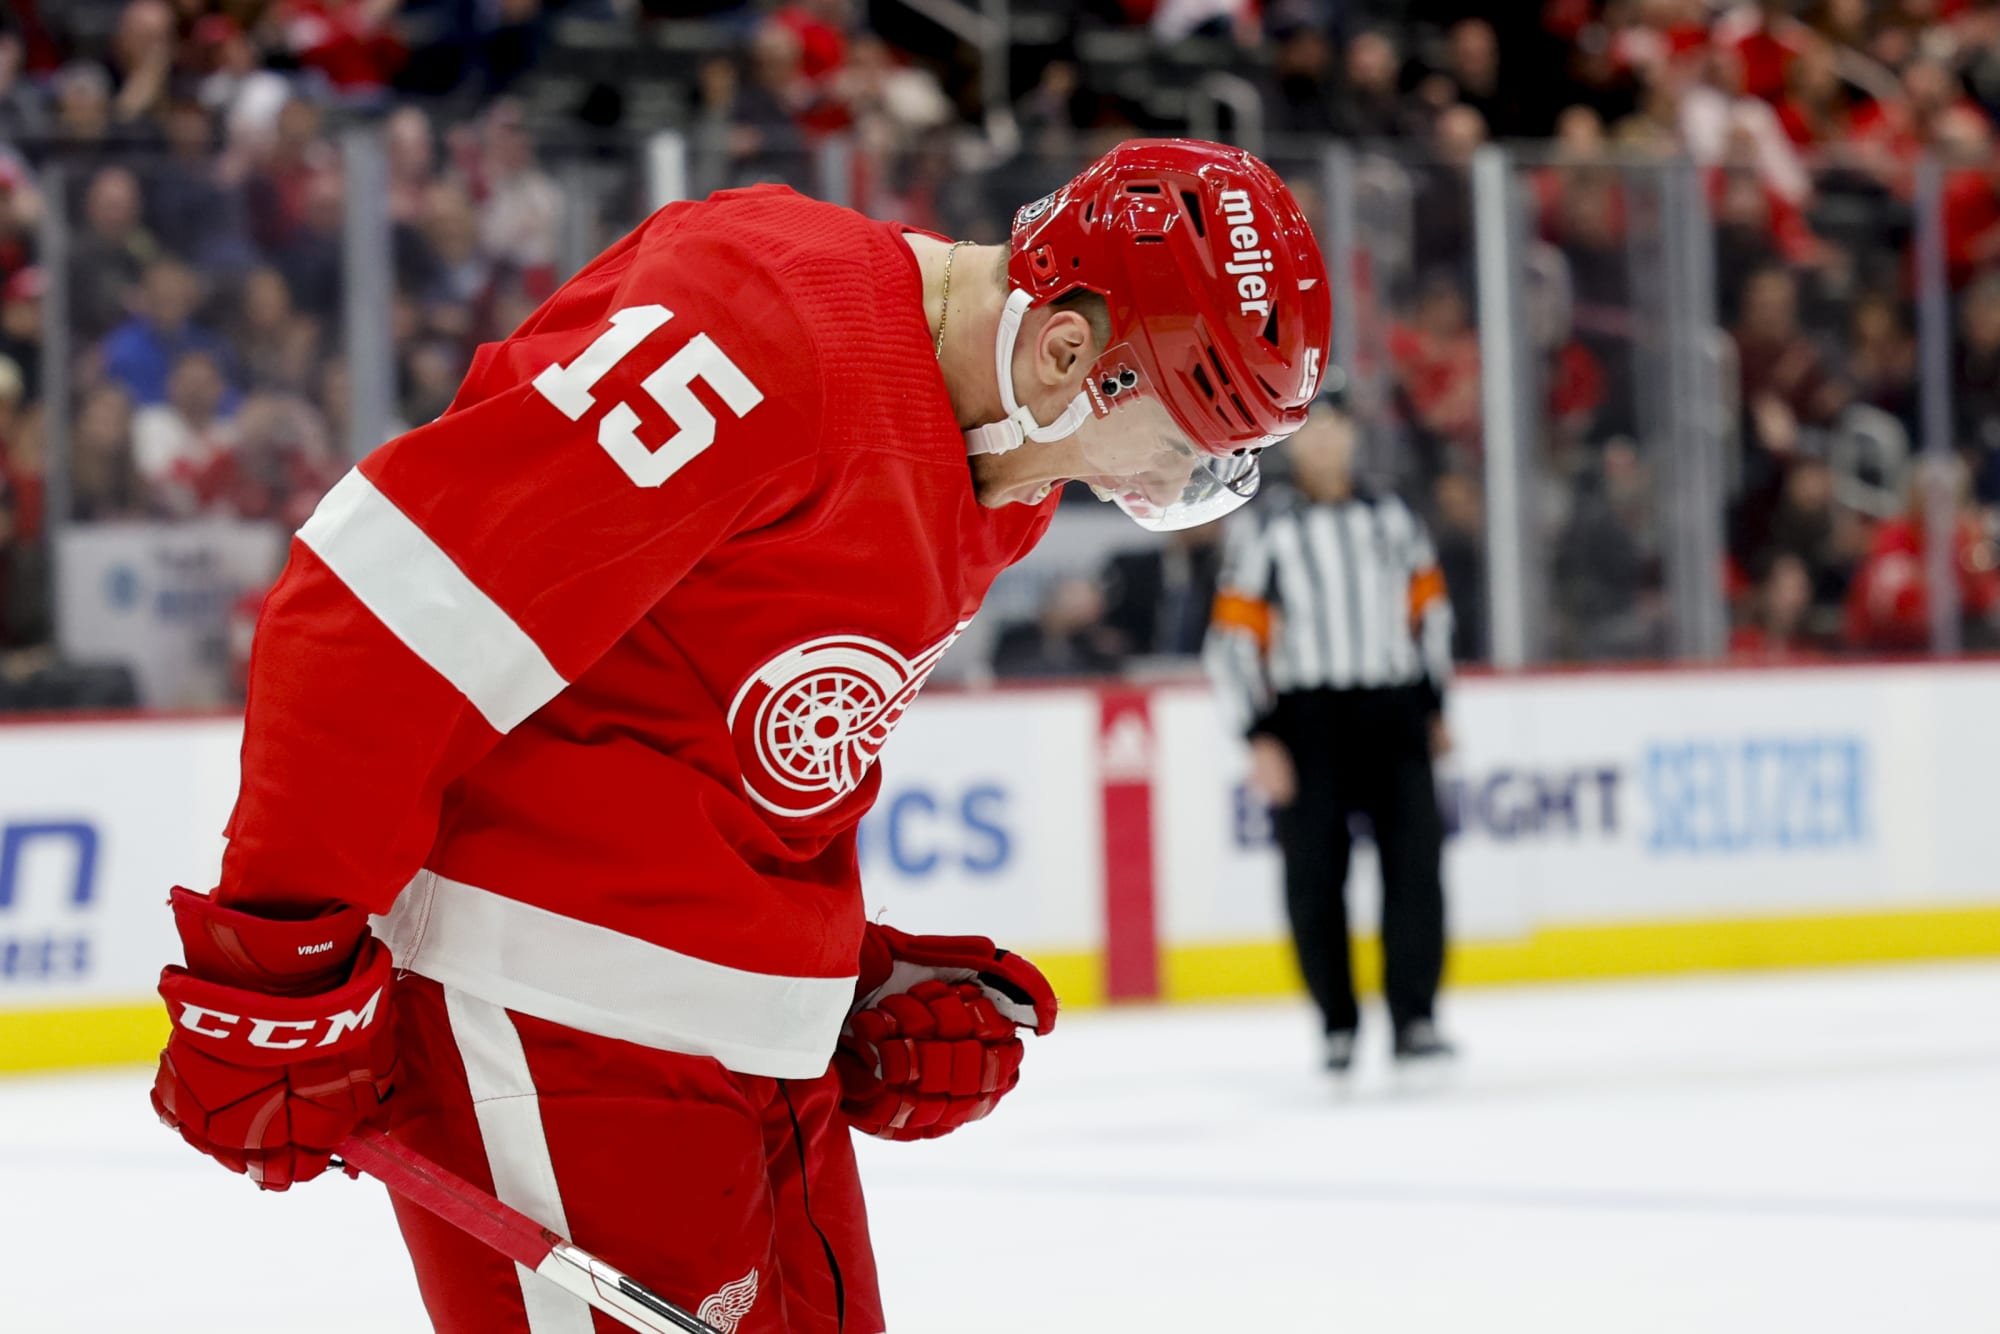 Jakub Vrana thriving two weeks after Detroit Red Wings traded him